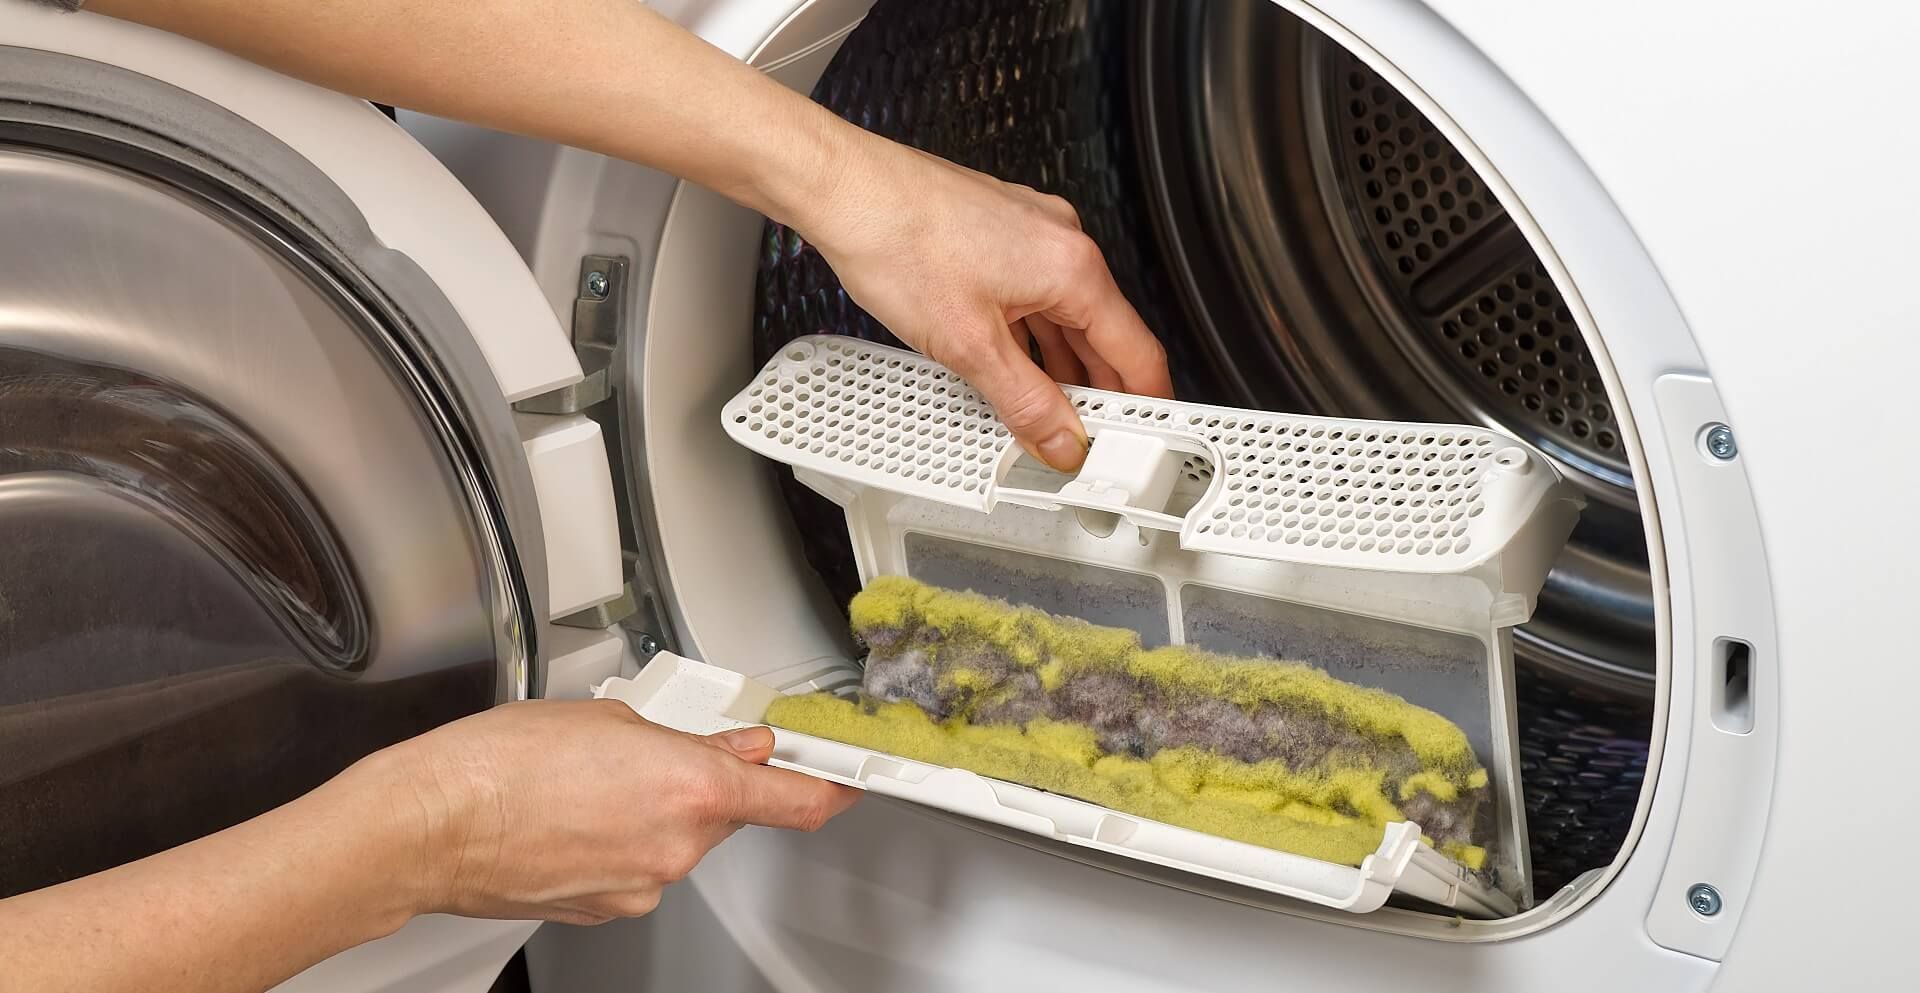 Cleaning your dryer vents professional can make a big difference in keeping you safe and your dryer functional